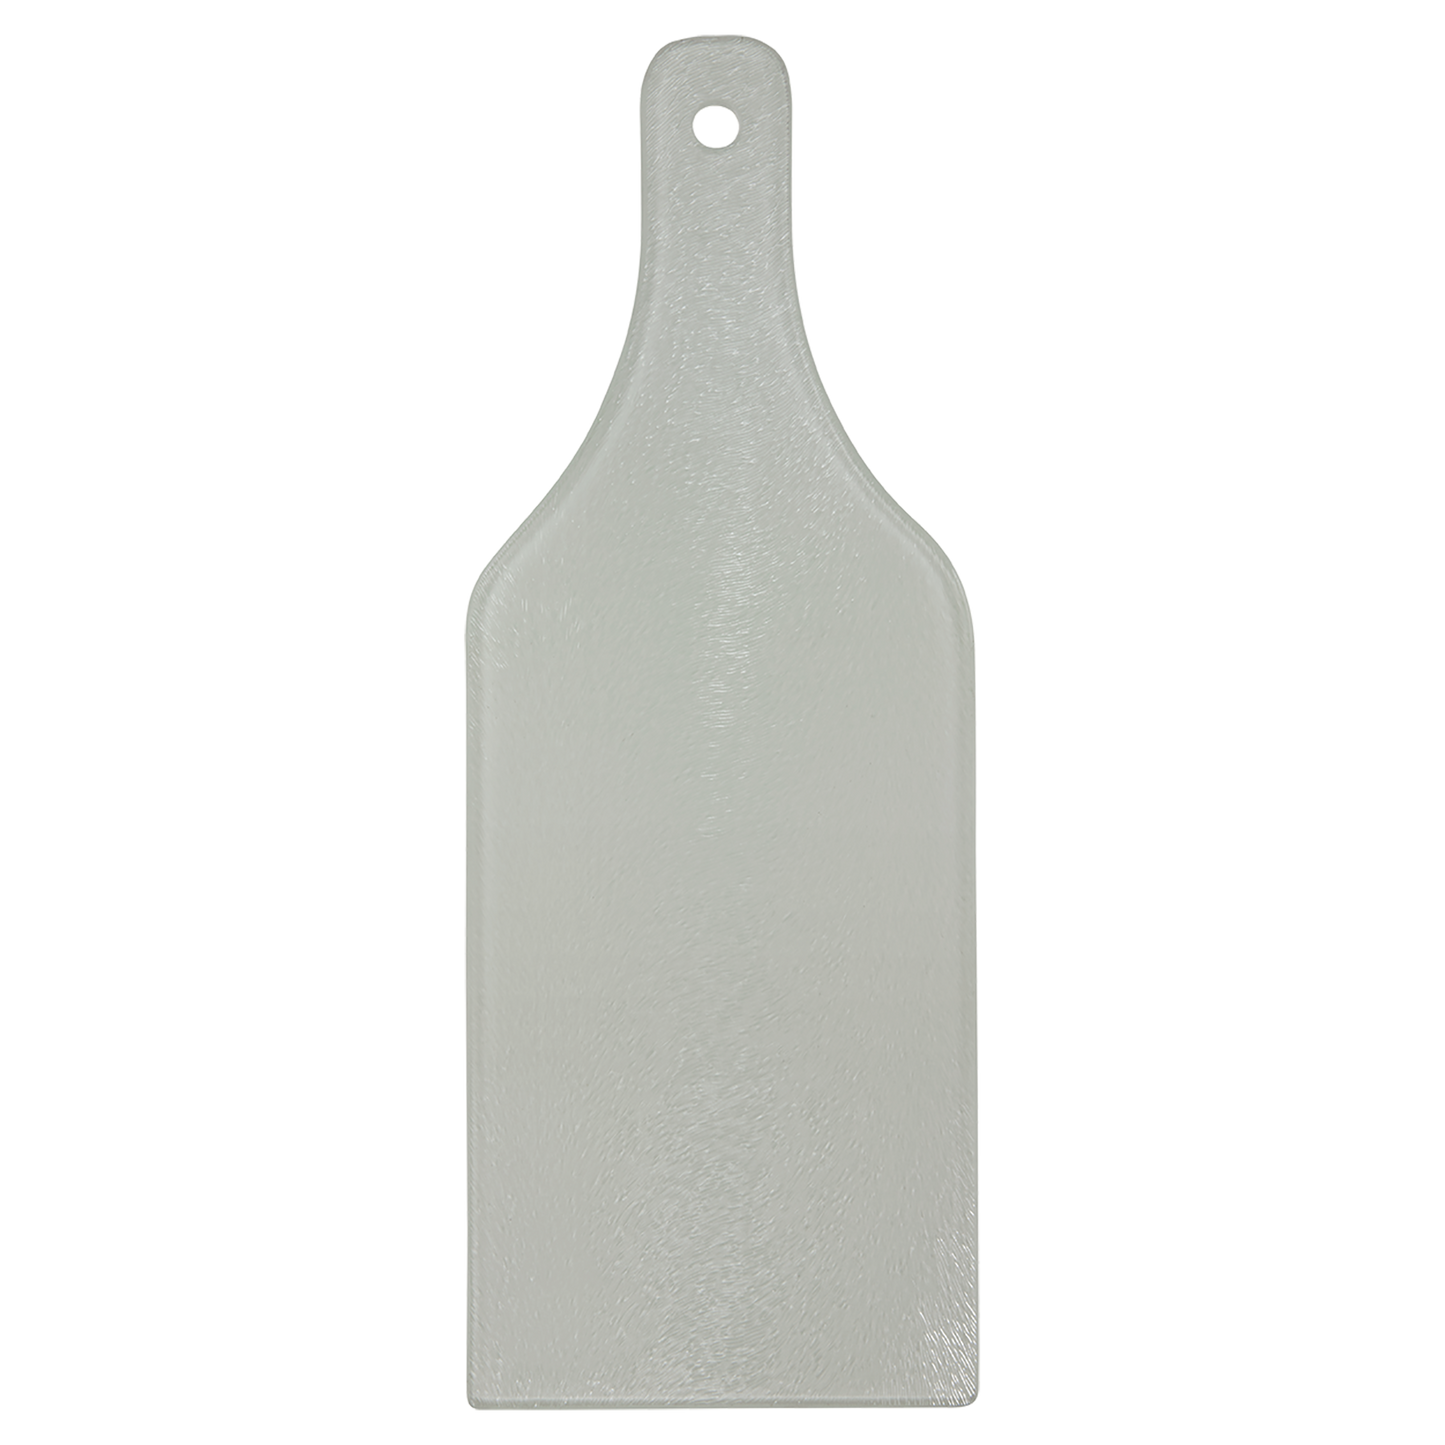 Sublimation Wine Bottle with White back cutting board, sublimatable, comes  with feet, Case of 5 ea, sublimatable wine bottle clear,Cutting Boards for  sublimation, sublimation cutting boards, wholesale sublimation cutting  board blanks, blank